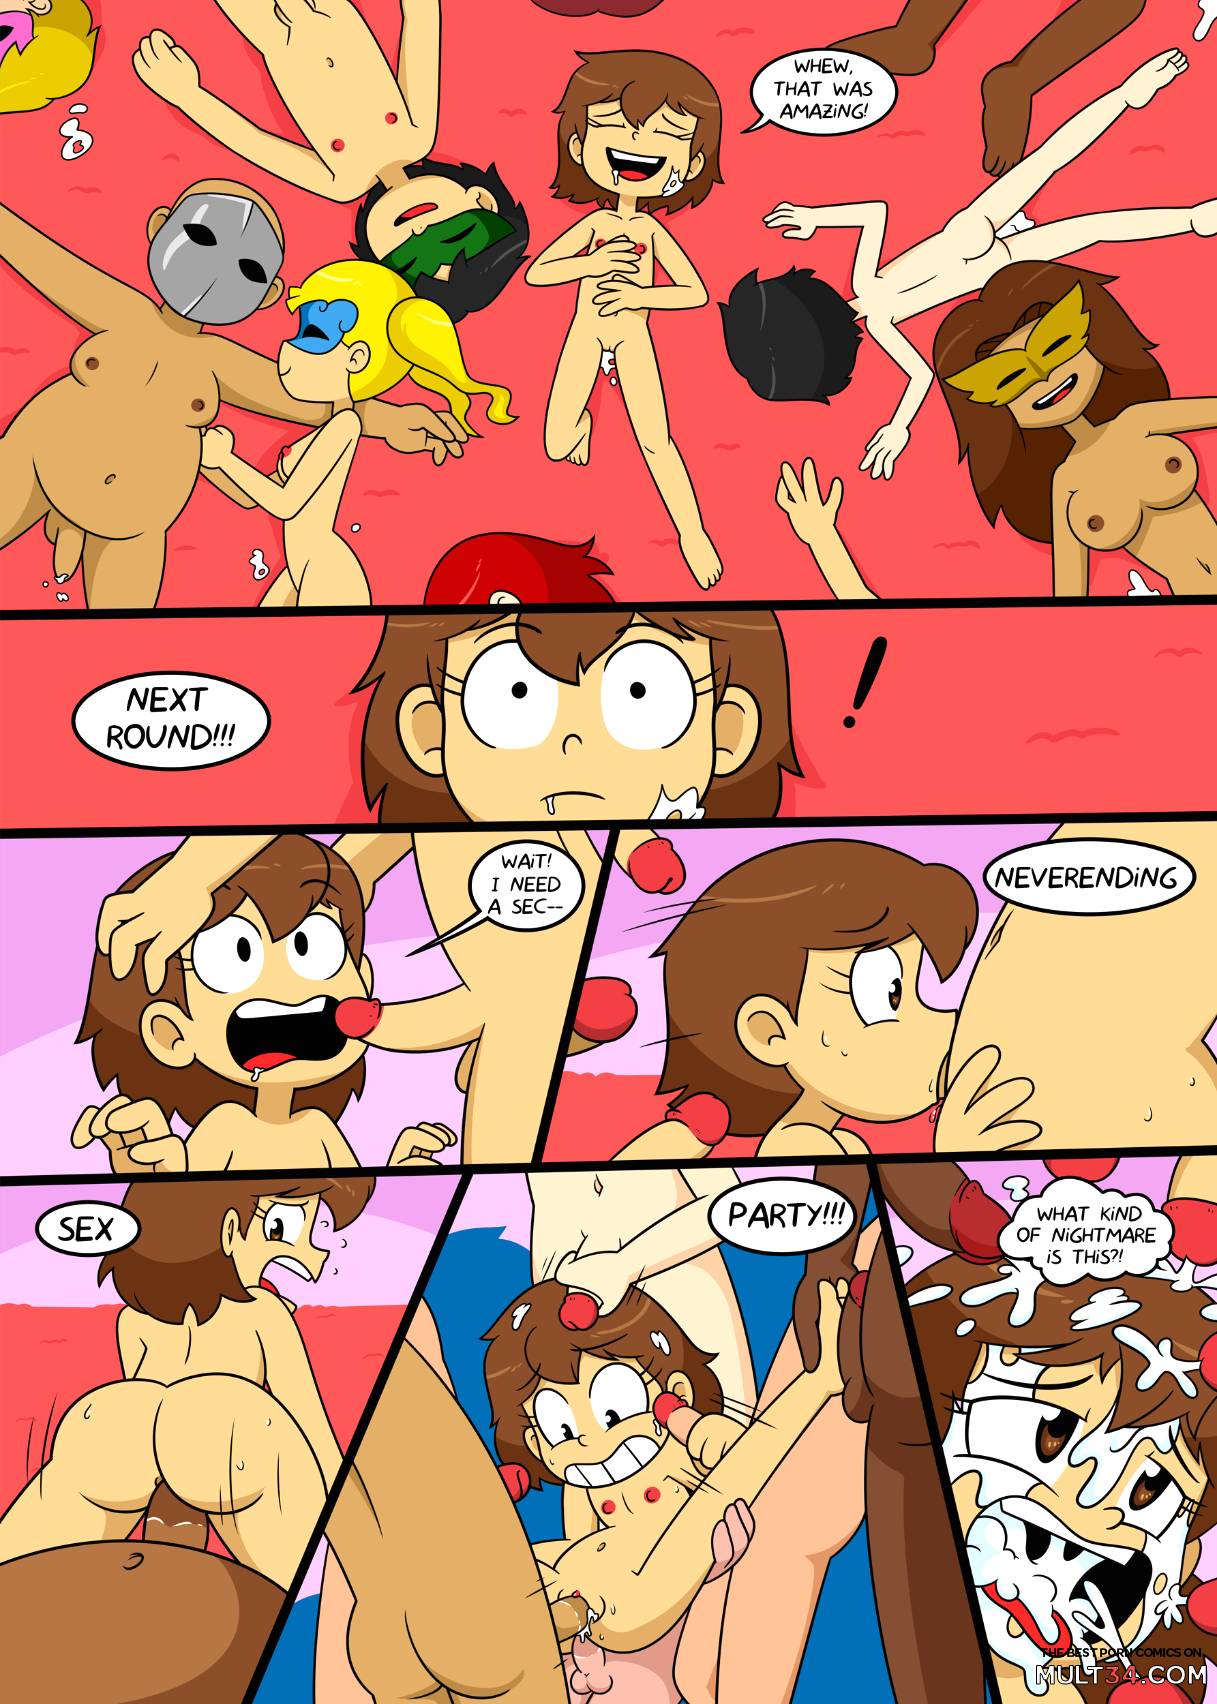 The Neverending Sex Party page 4